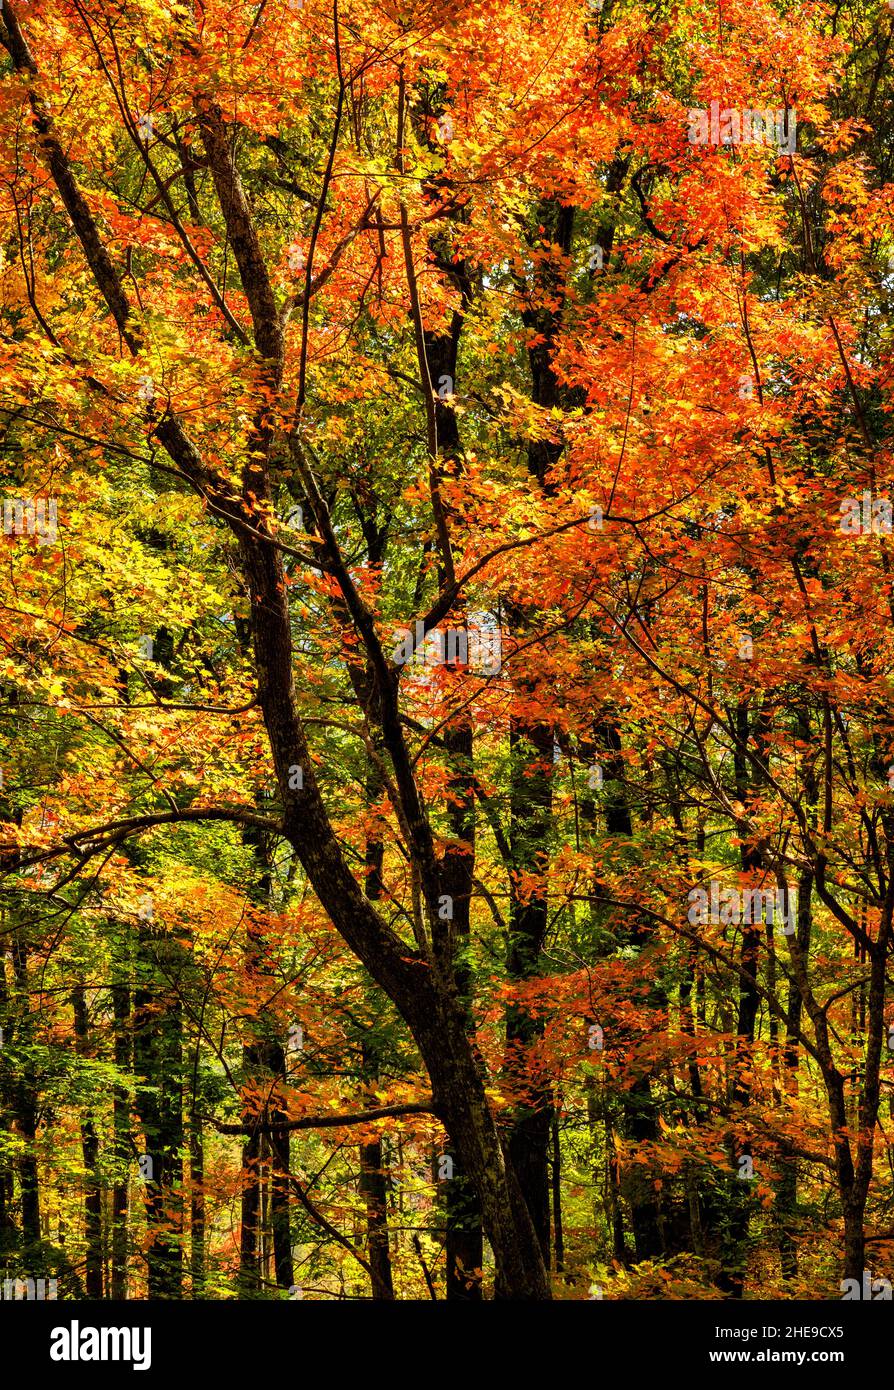 USA, Tennessee, Great Smoky Mountains National Park, Autumn leaves along the Laurel Falls Trail Stock Photo